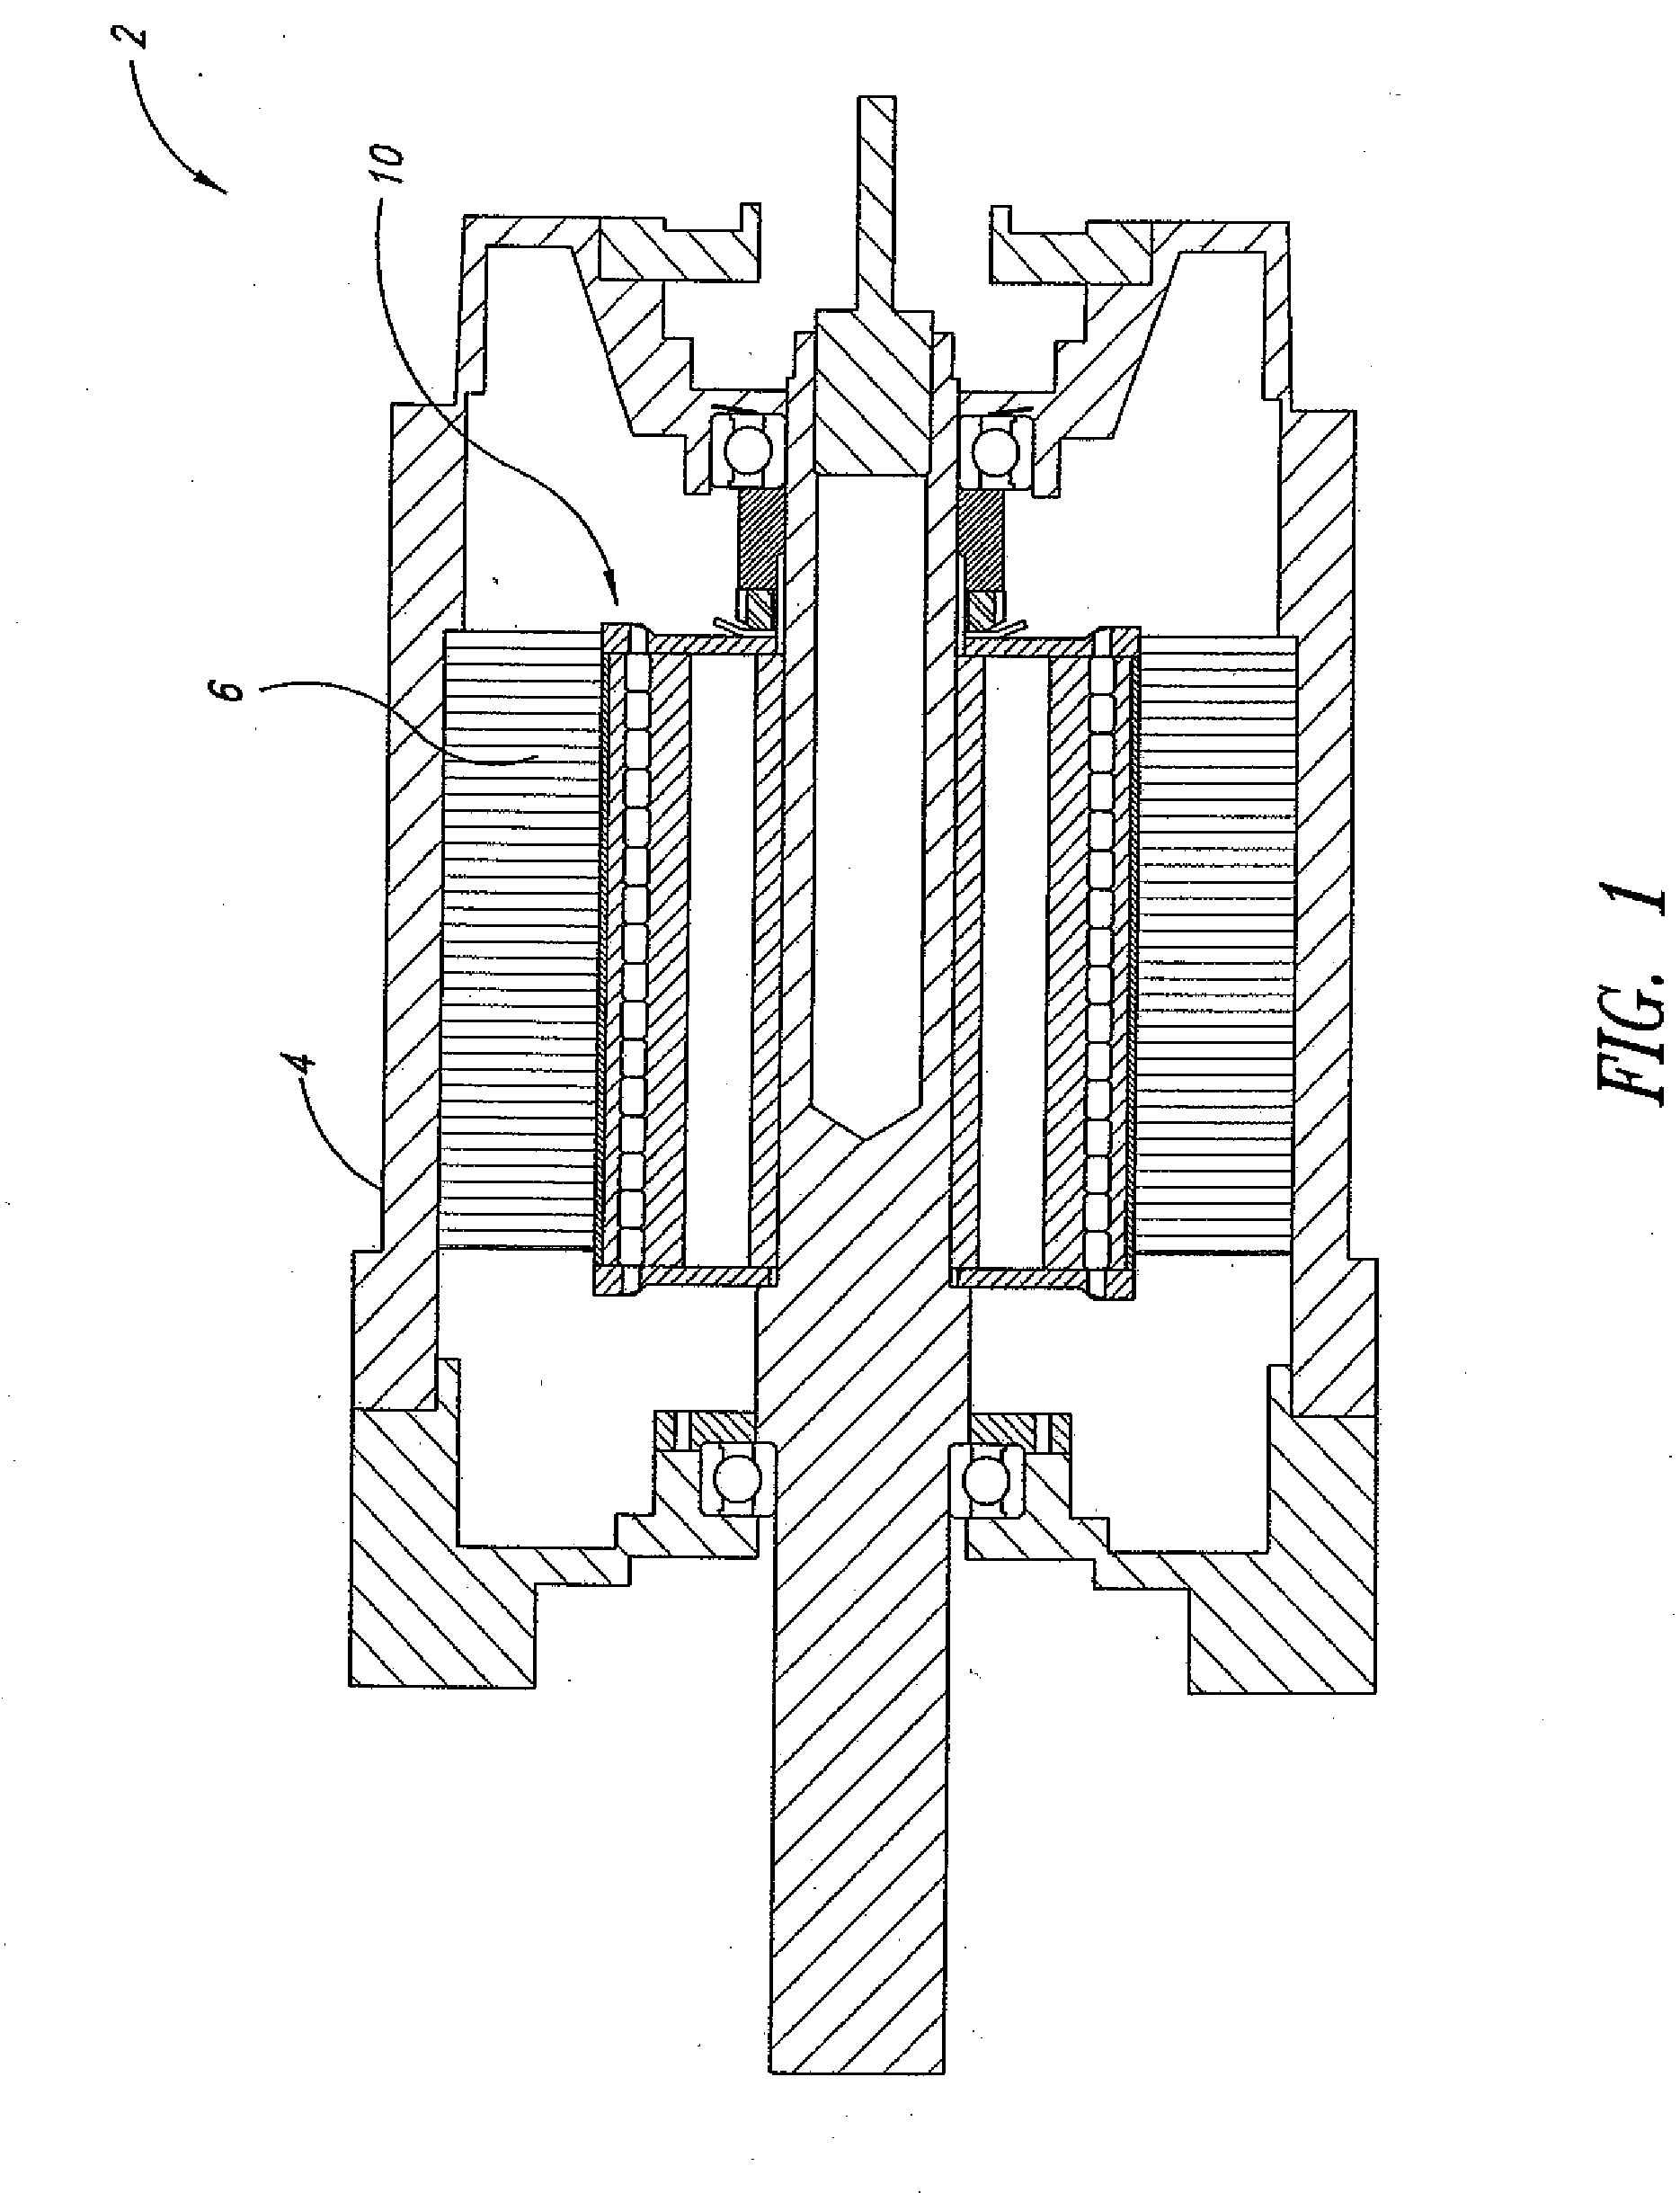 Rotor hub and assembly for a permanent magnet power electric machine